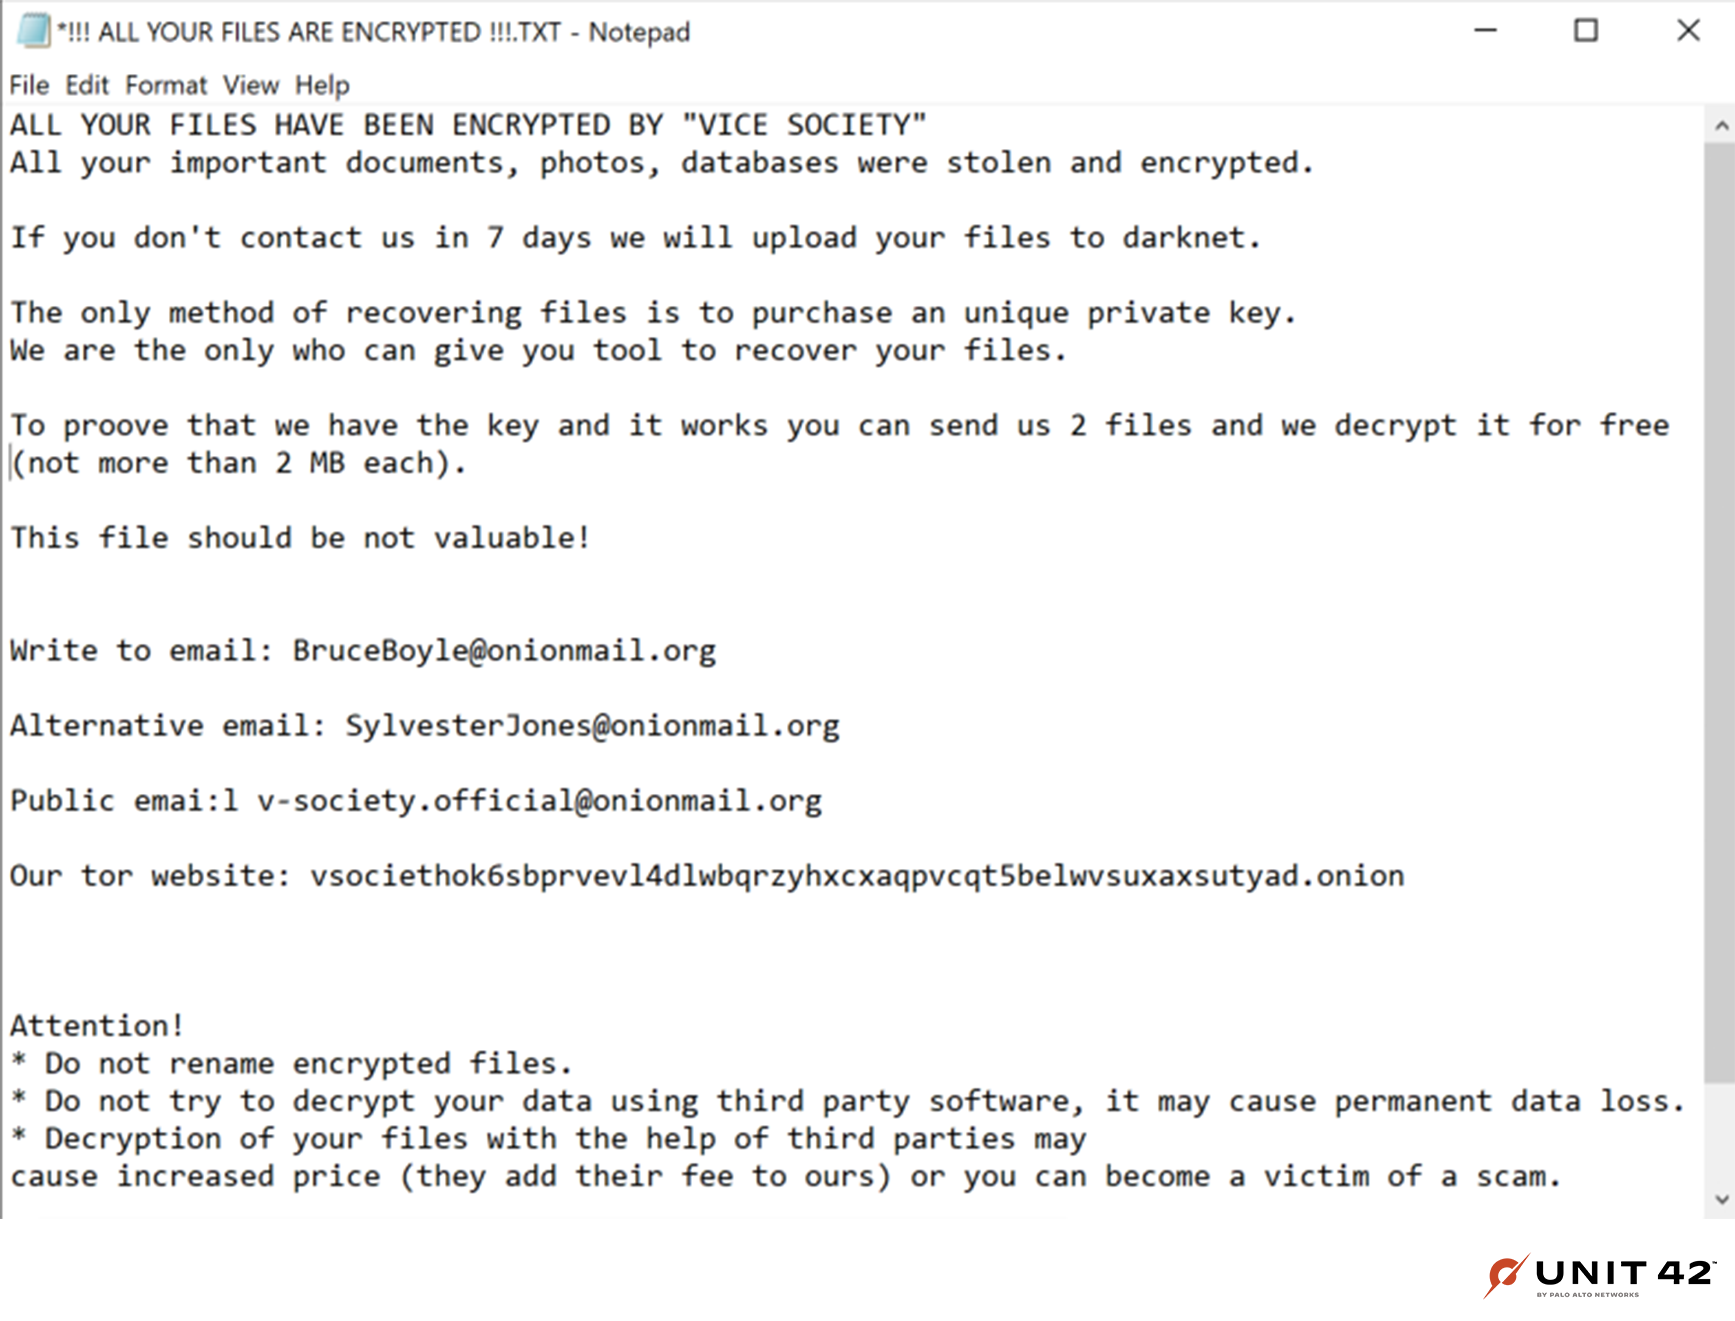 Figure 13 is a screenshot of a Vice Society ransom note using Zeppelin ransomware. It details what was encrypted, how to recover the encrypted files, who to contact, and what steps to avoid. 